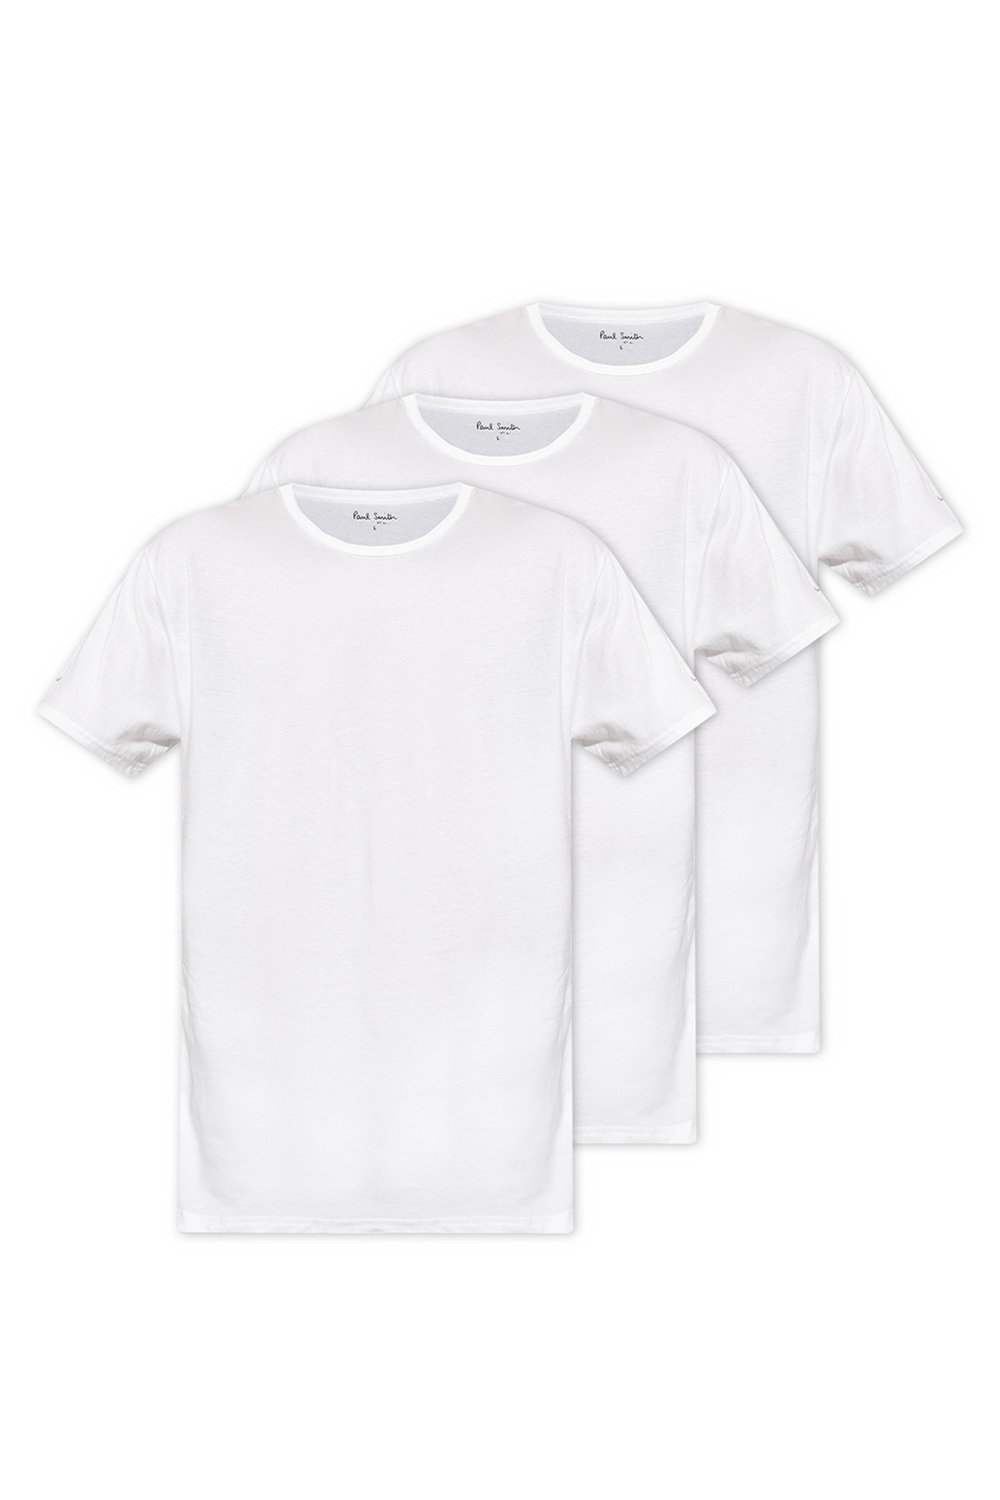 Paul Smith T-shirt 3-pack